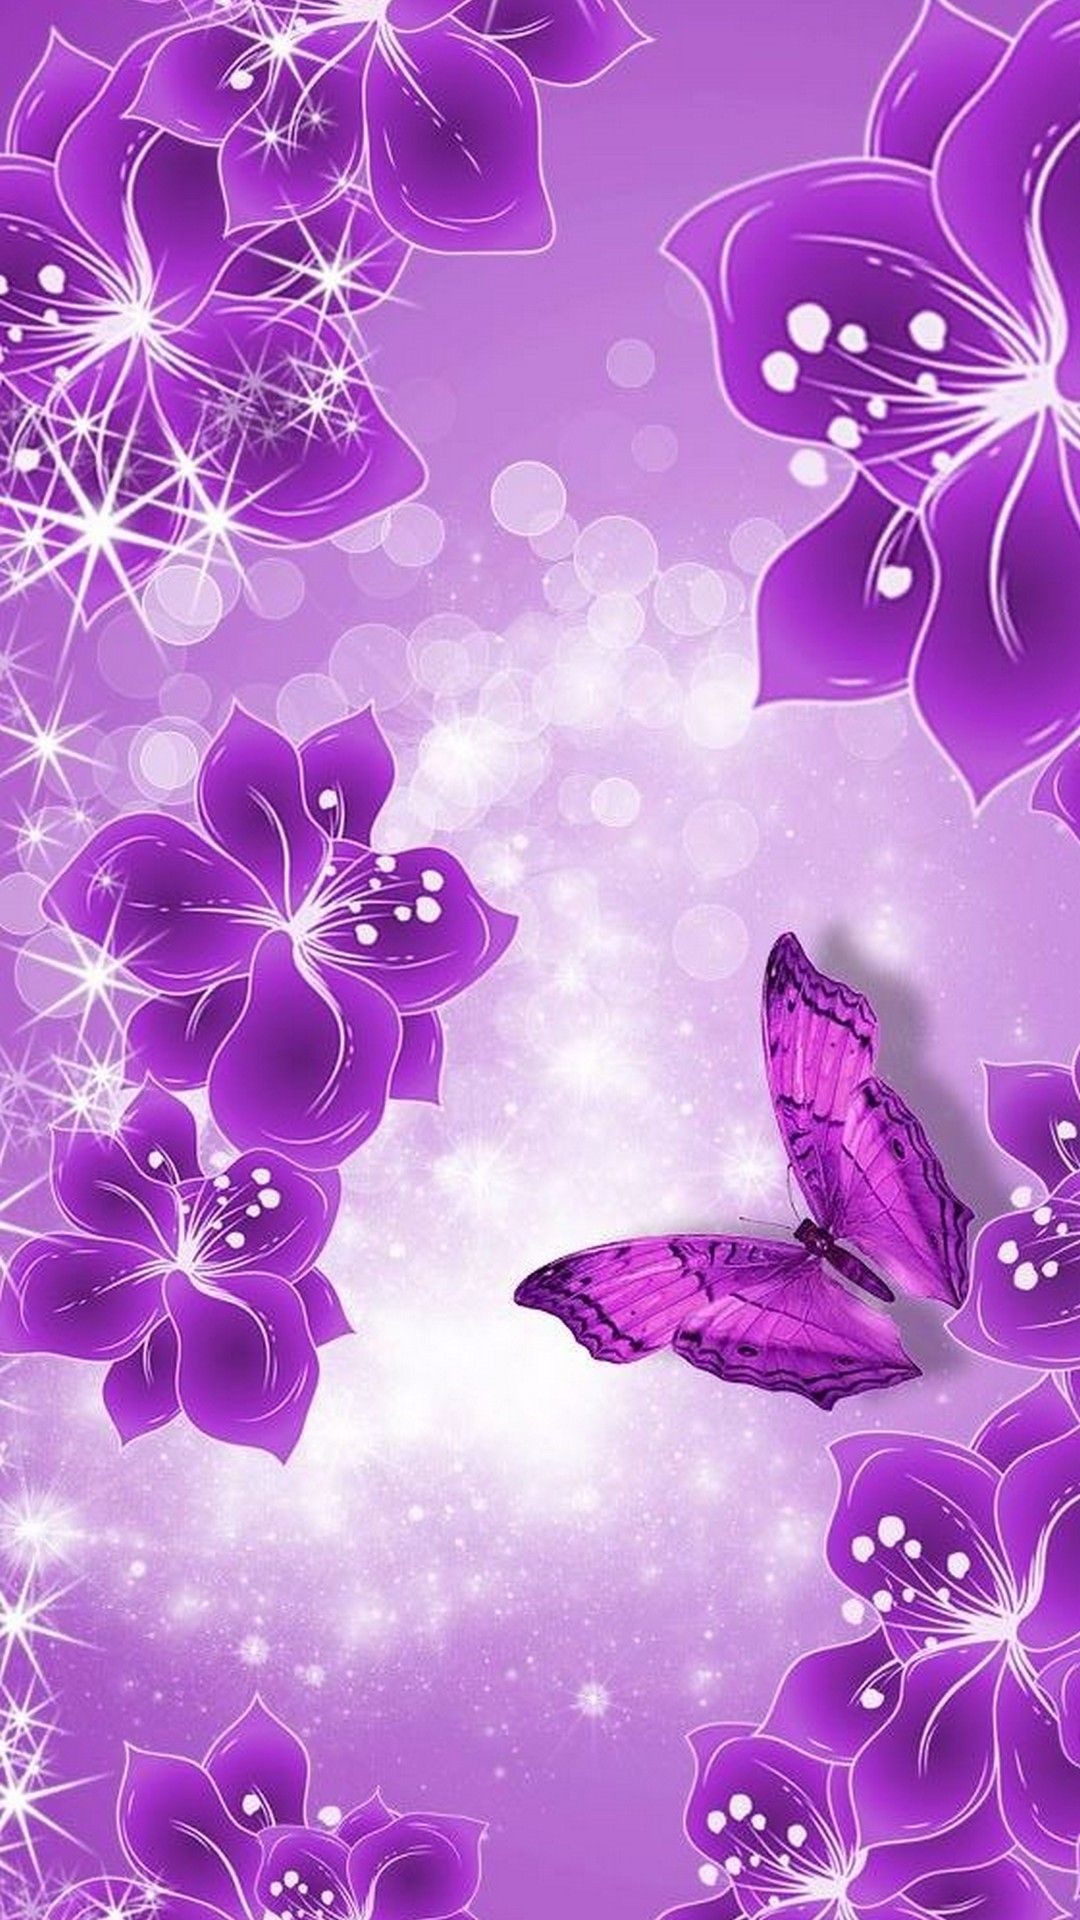 1080x1920 Purple Butterfly HD Wallpapers For Mobile is best high definition wallpaper  image 2018. You can use this wallpaper as background for your desktop  Computer ...